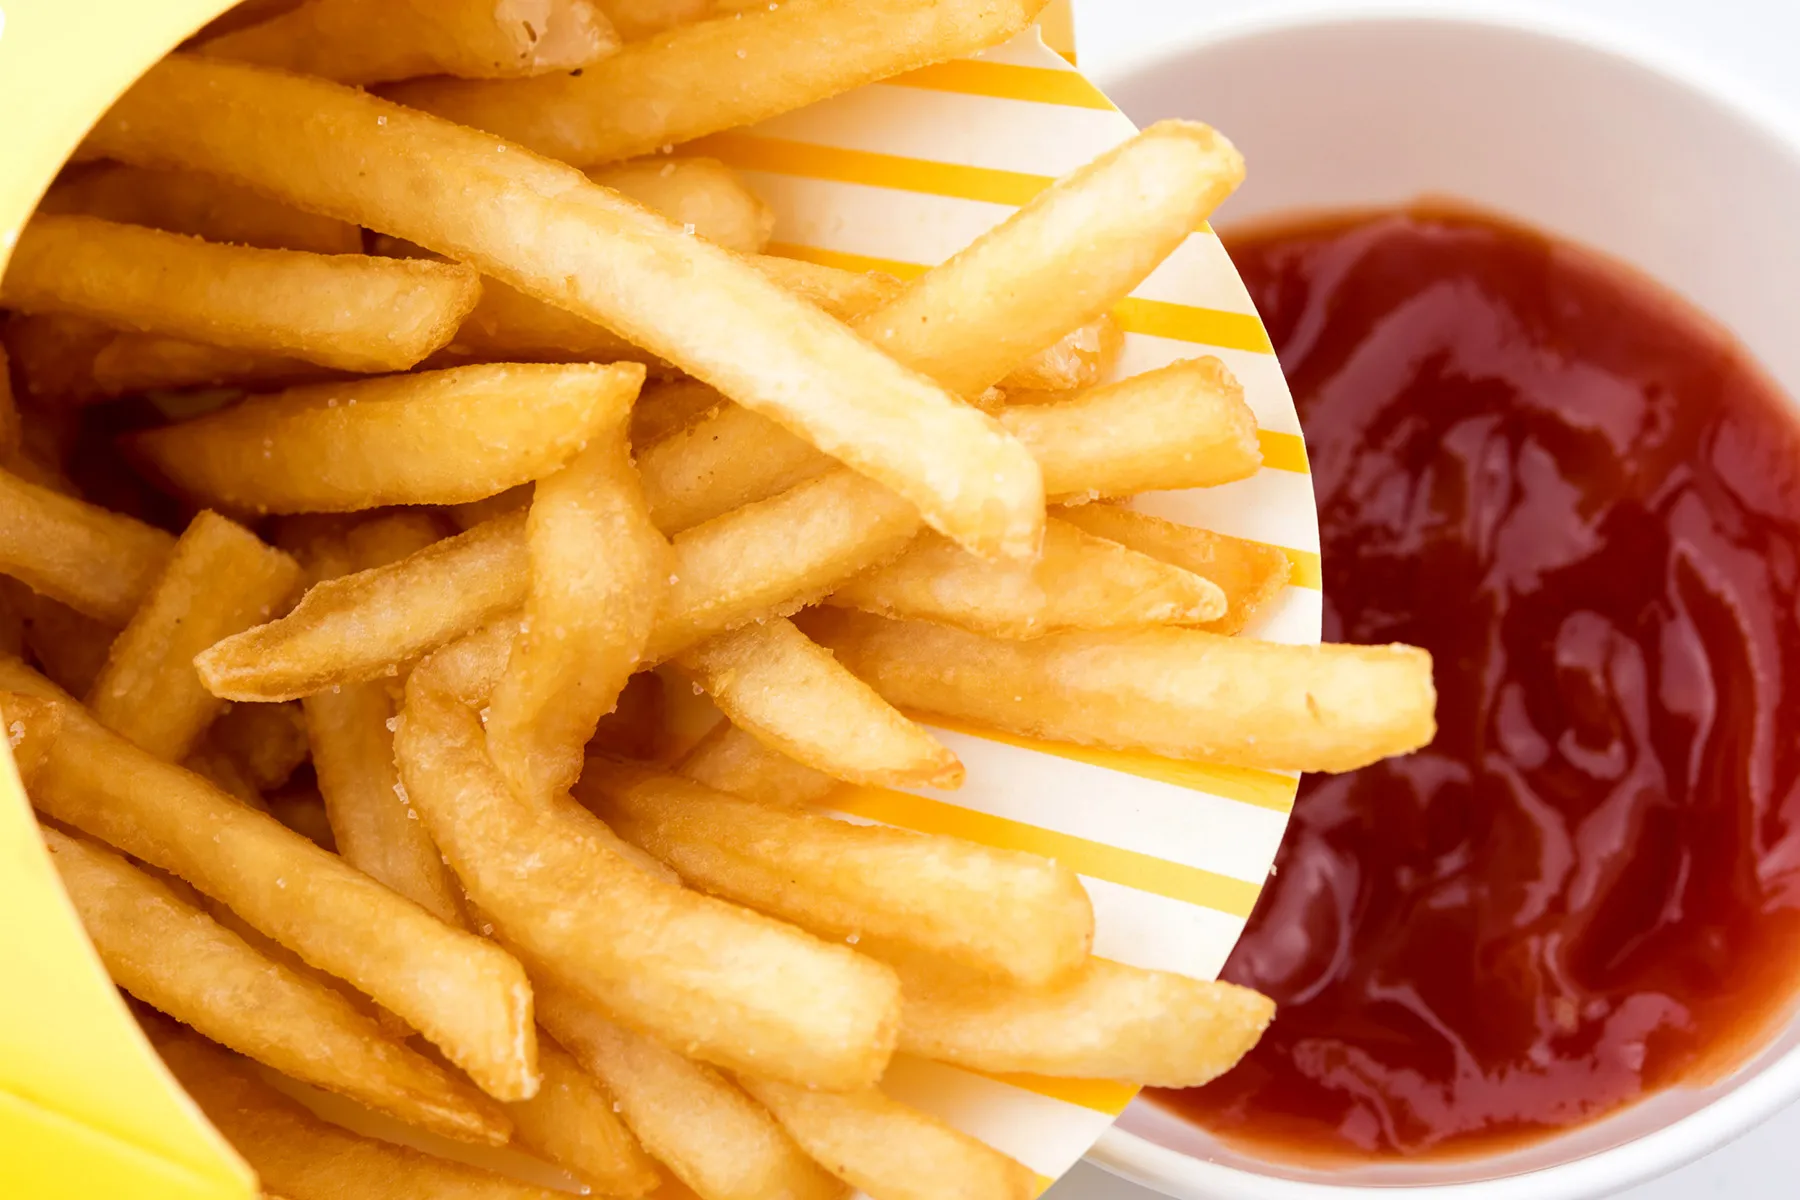 French Fries Vs. Almonds Every Day for a Month: What Changes?